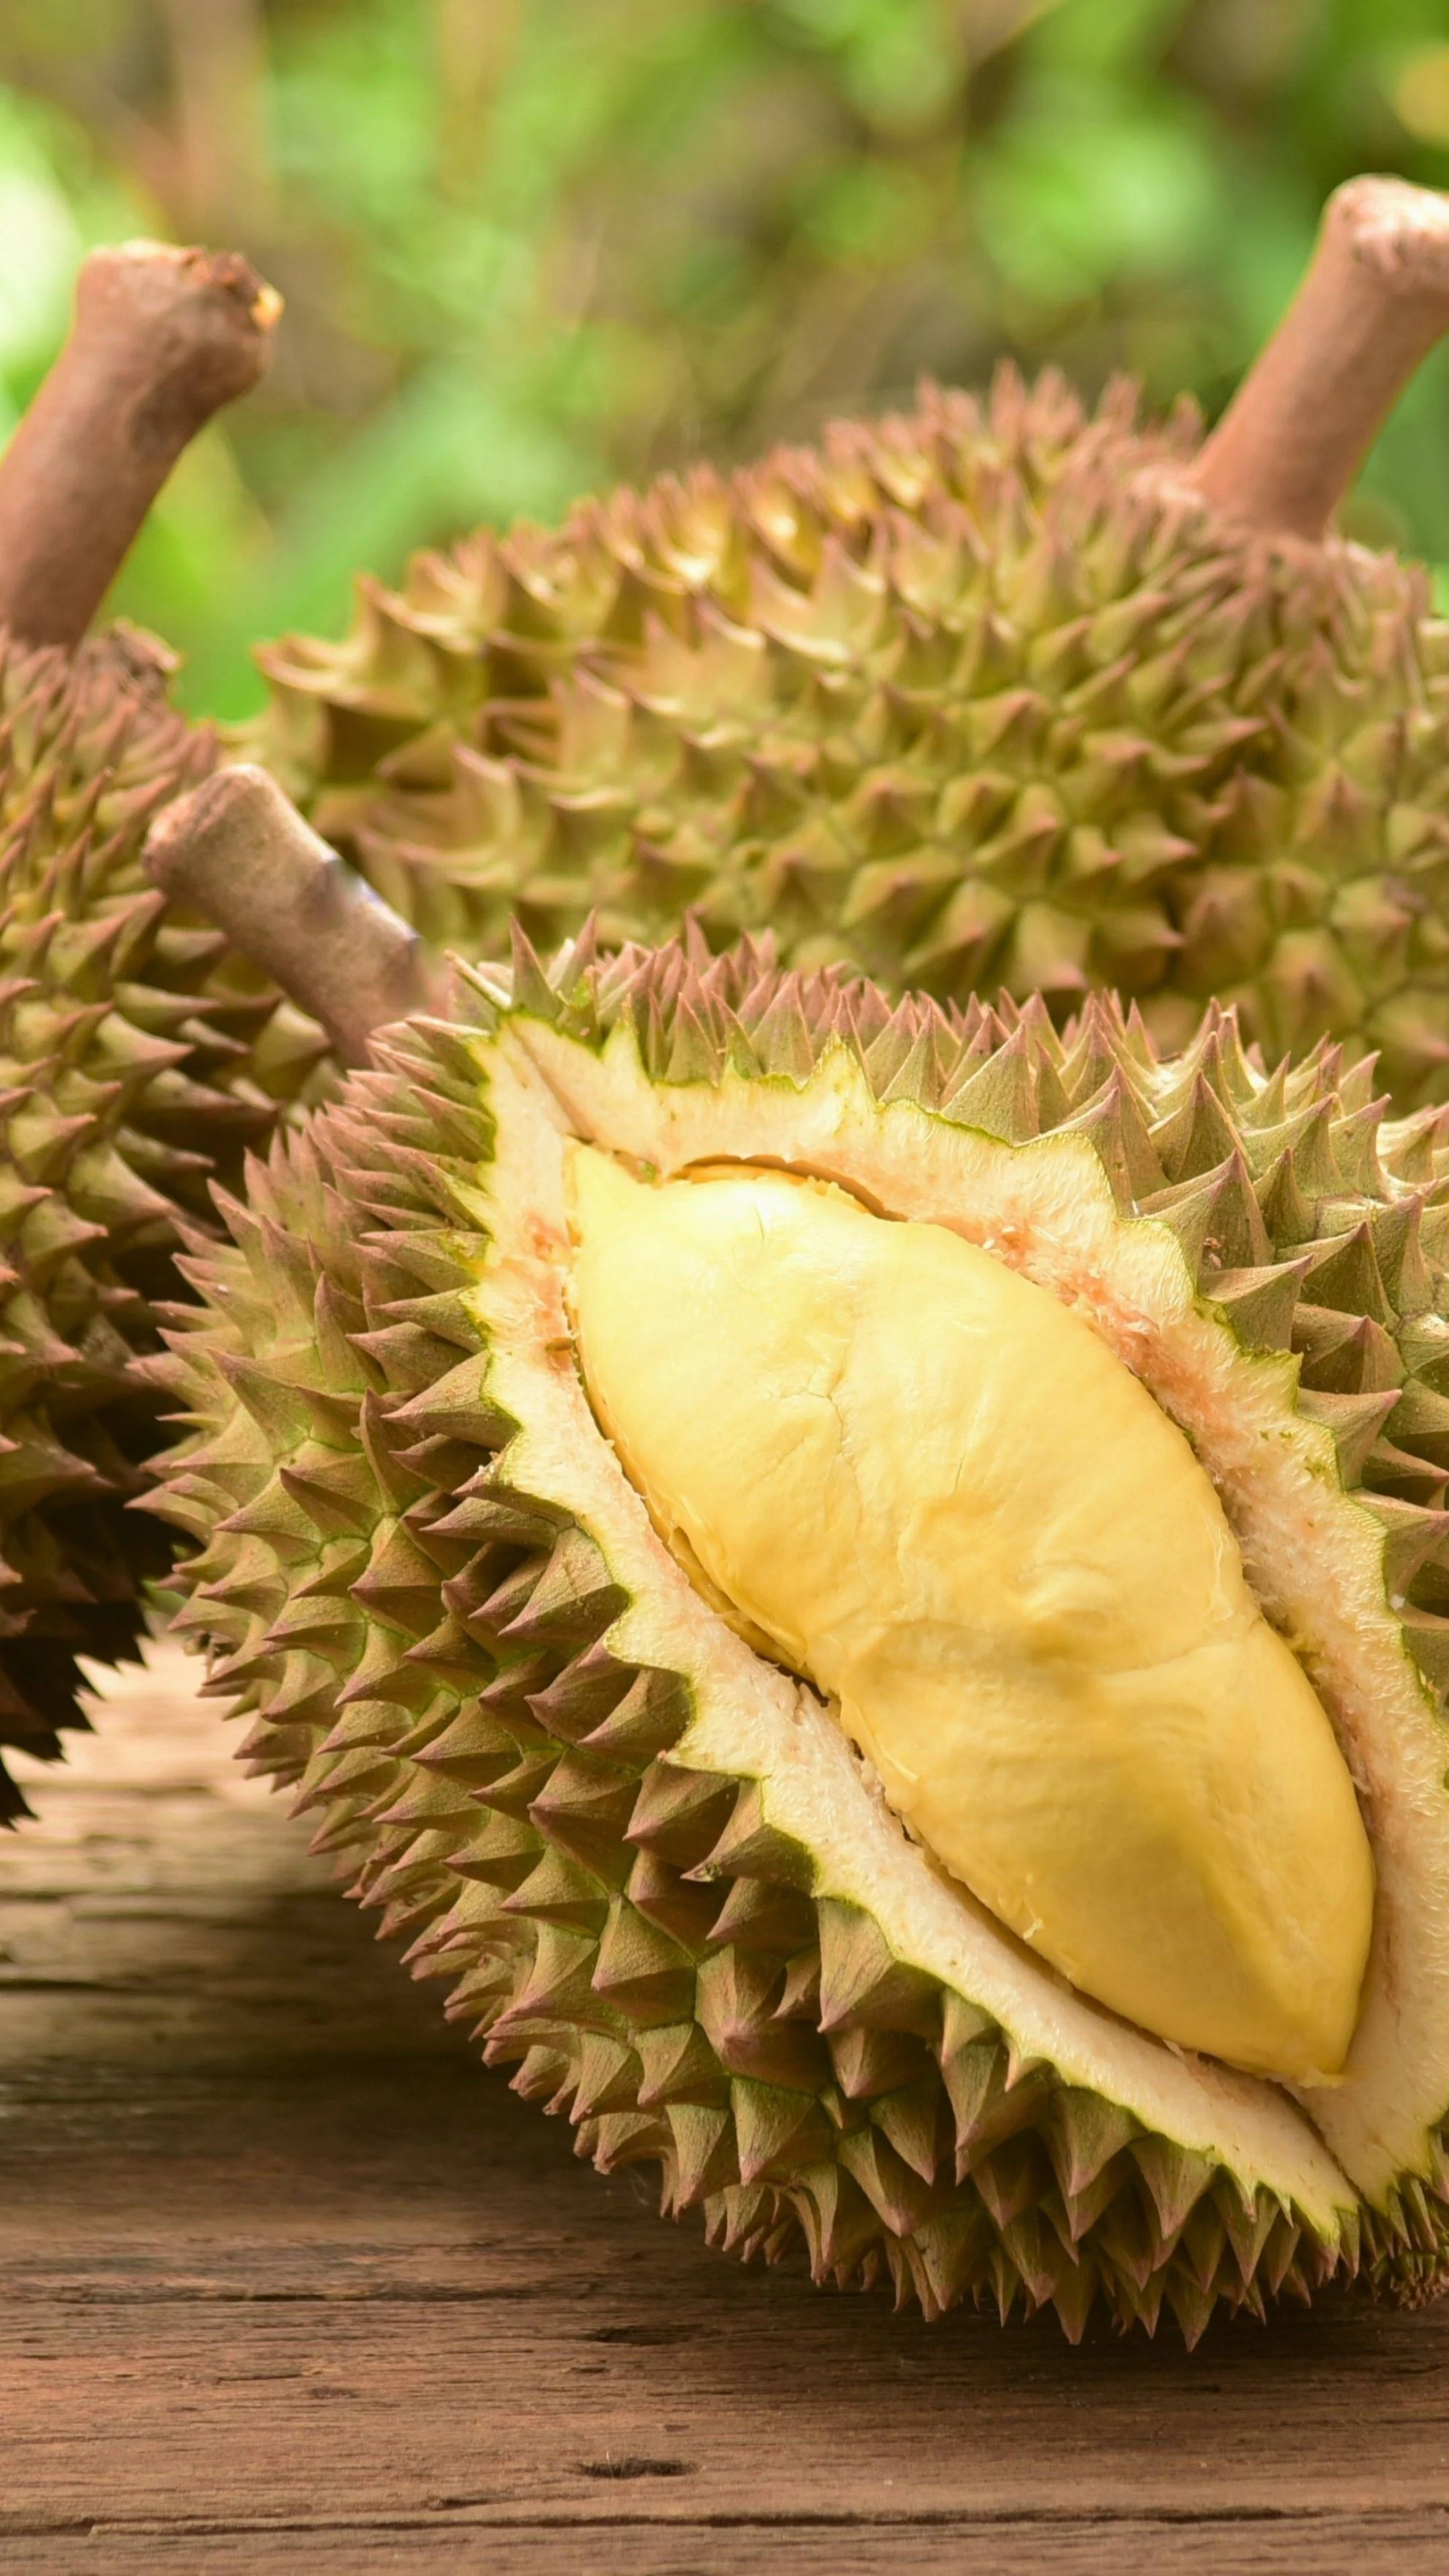 Durian: The edible fruit of several tree species belonging to the genus Durio. 2160x3840 4K Background.